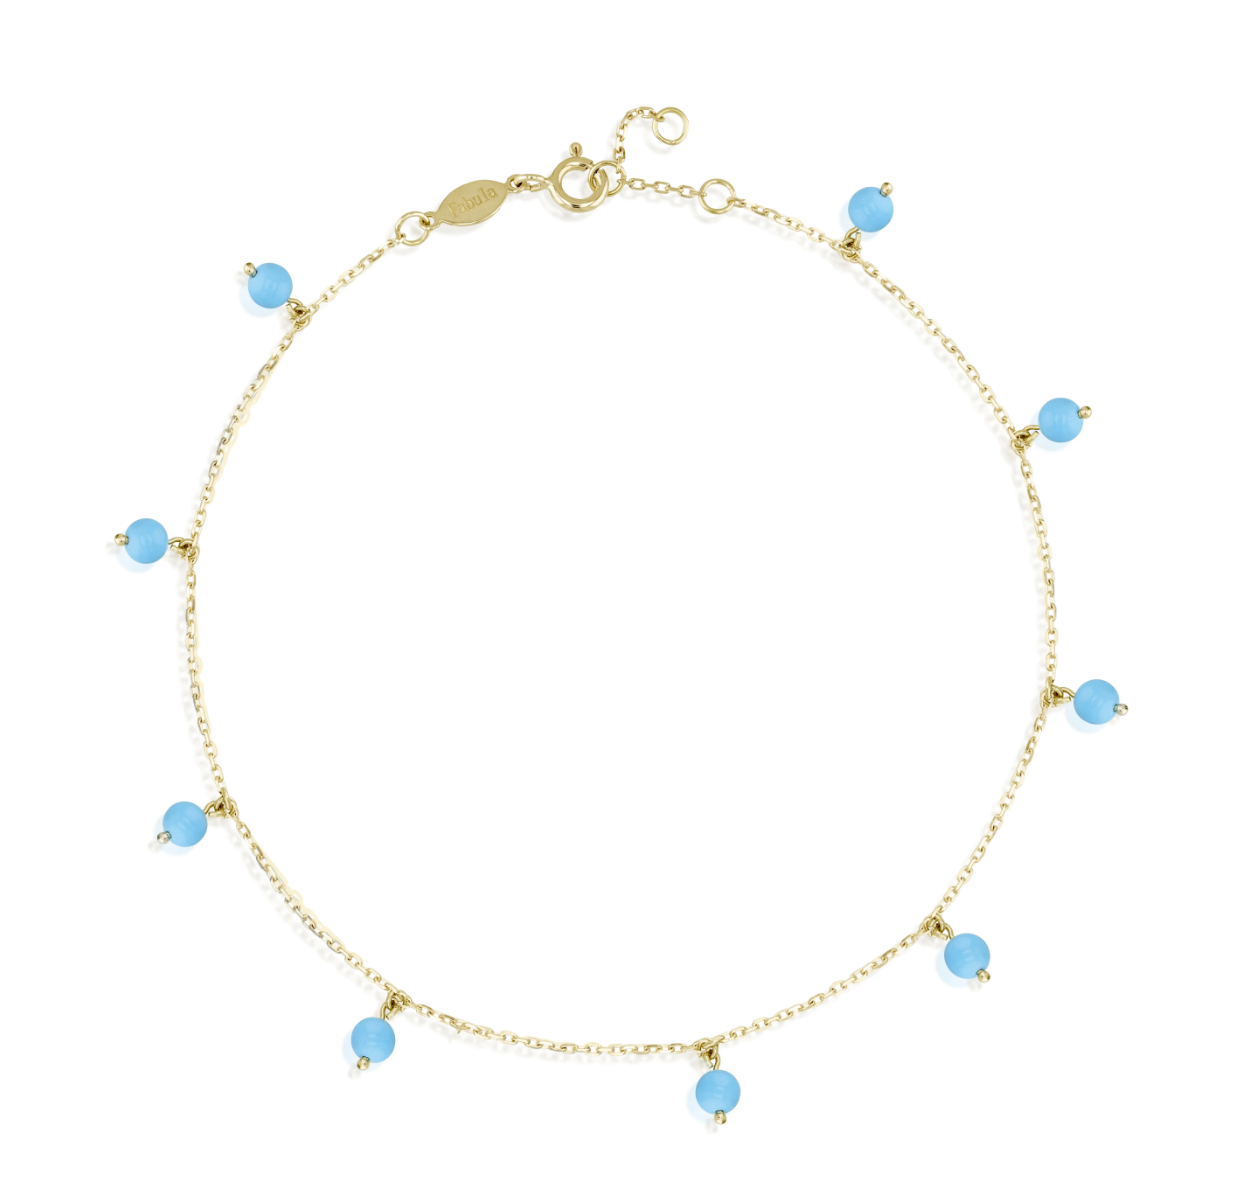 Turquoise Droplets Necklace